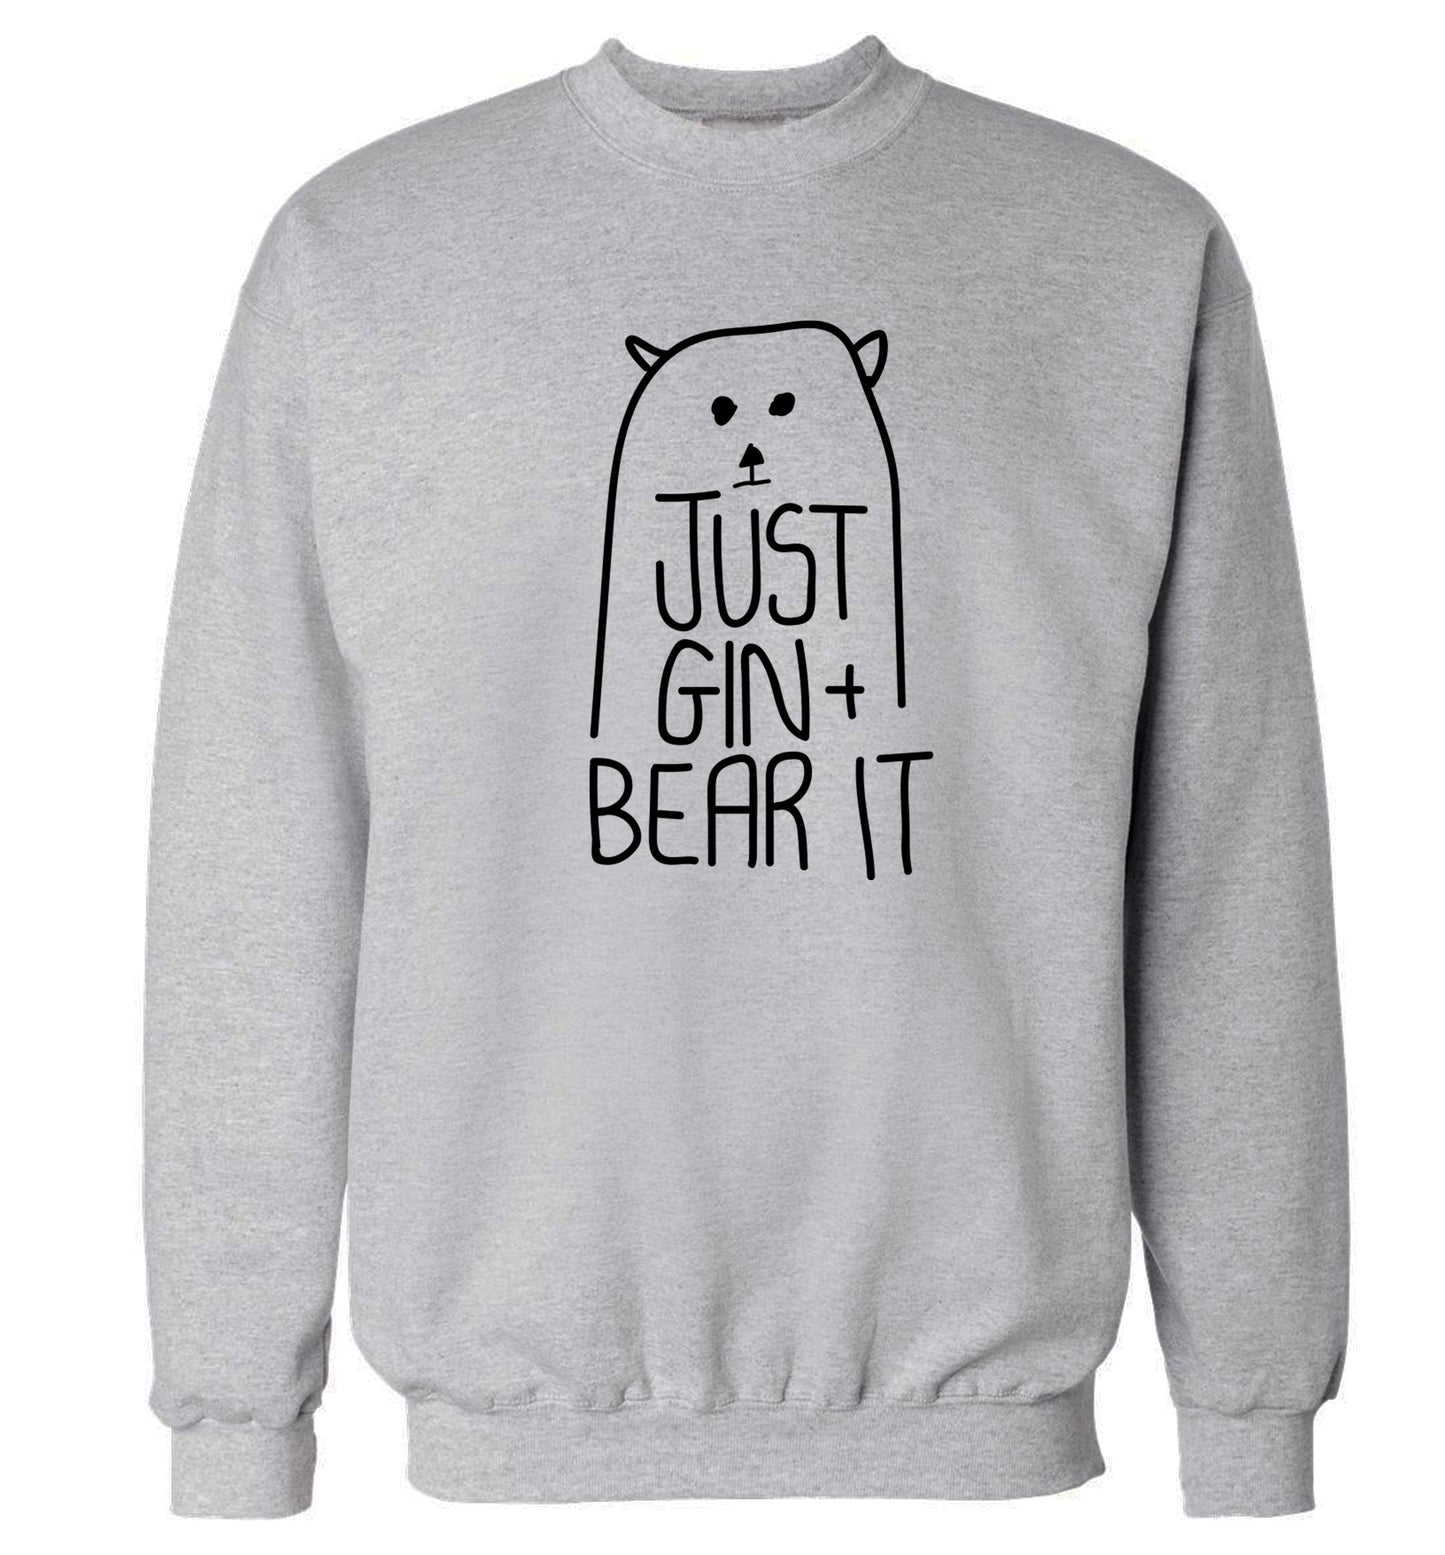 Just gin and bear it Adult's unisex grey Sweater 2XL